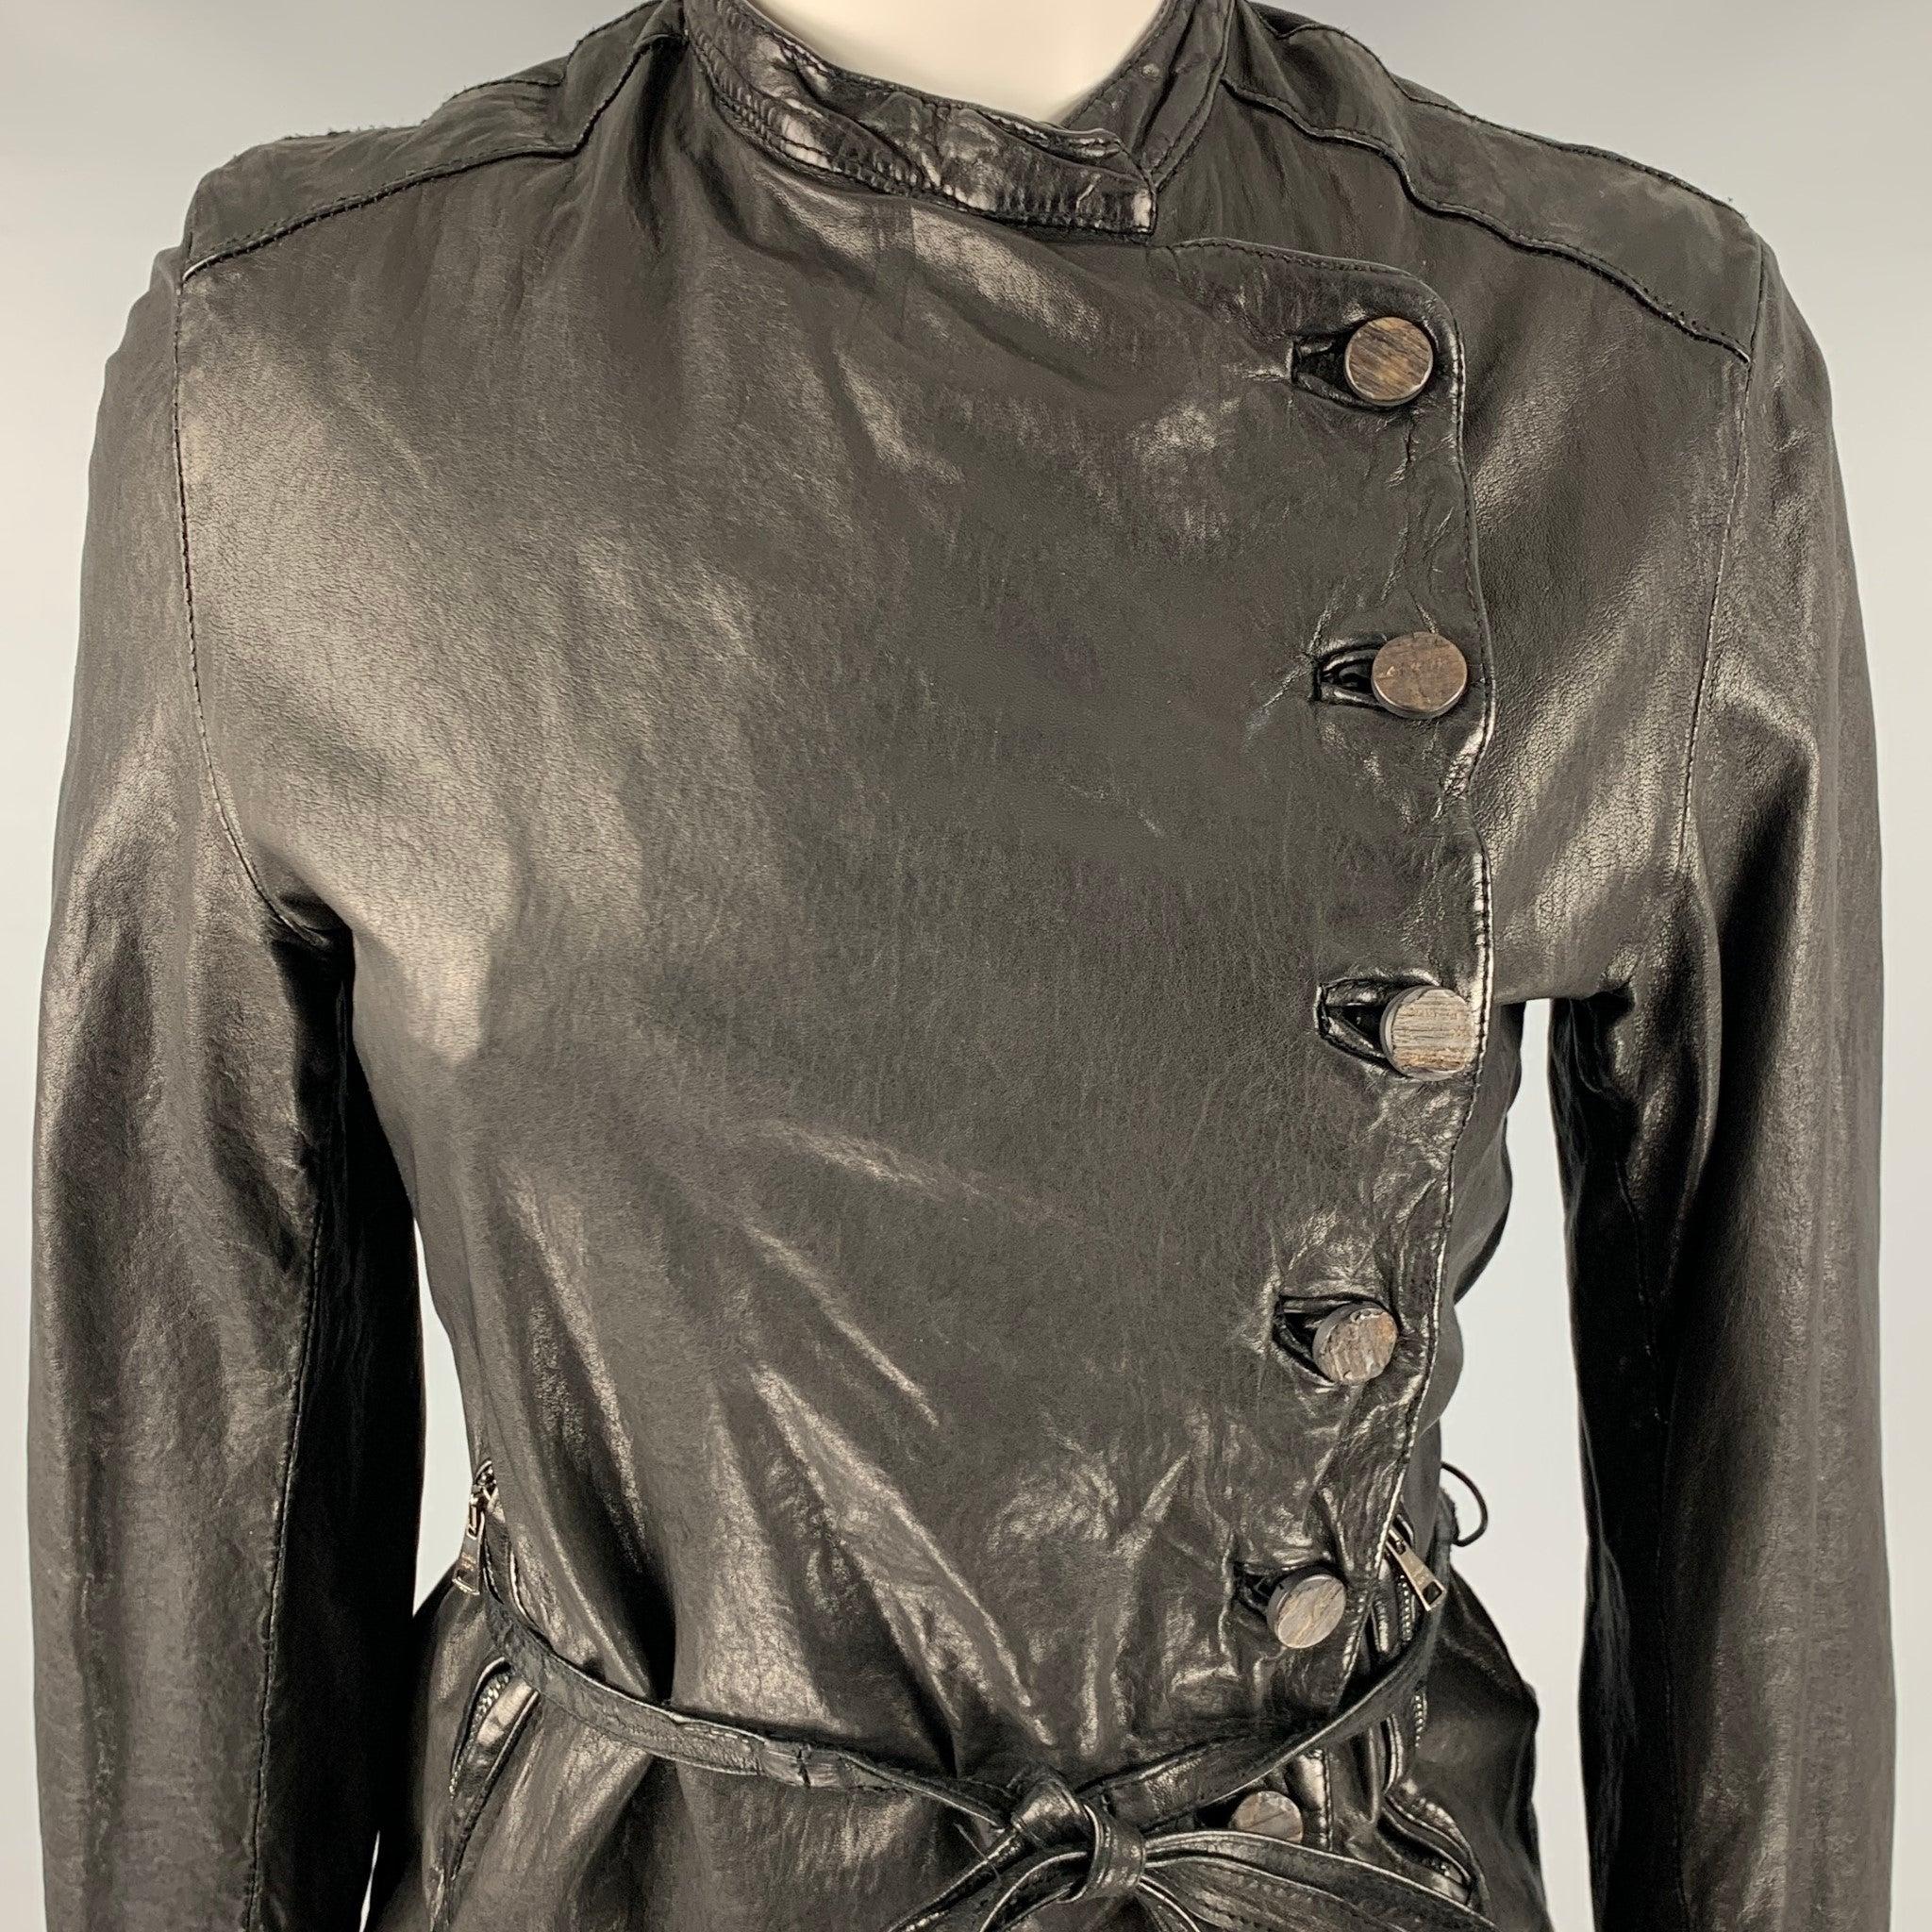 GIORGIO BRATO jacket
in a black leather fabric featuring vegetable tan, belted style, and an asymmetrical button closure. Made in Italy.Very Good Pre-Owned Condition. Moderate signs of wear. 

Marked:   IT 40 

Measurements: 
 
Shoulder: 15 inches 